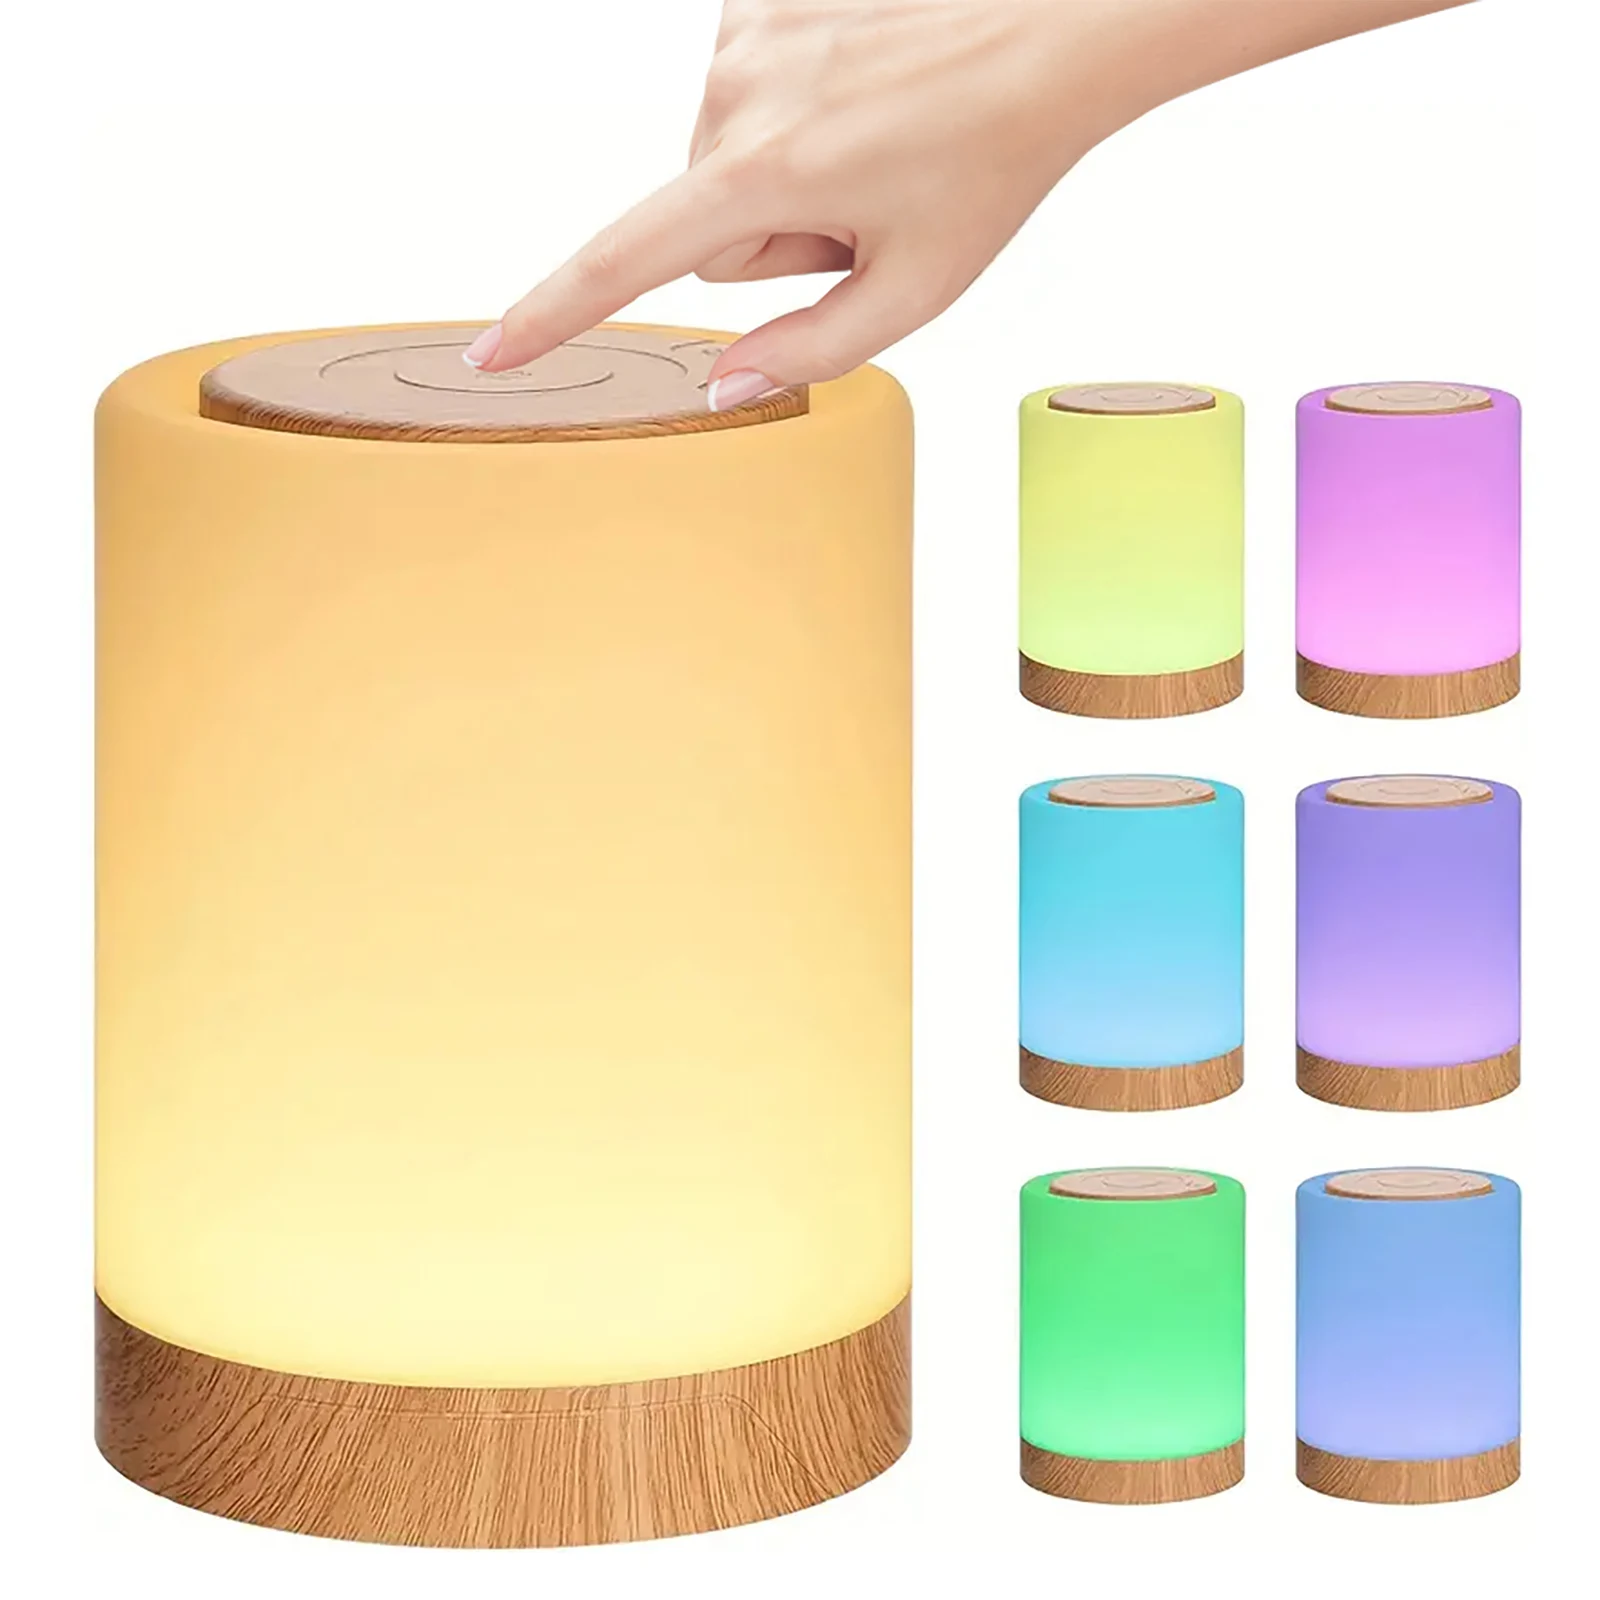 Ortable bedside table lamp room decorating items usb rechargeable tabletop lighting for thumb200